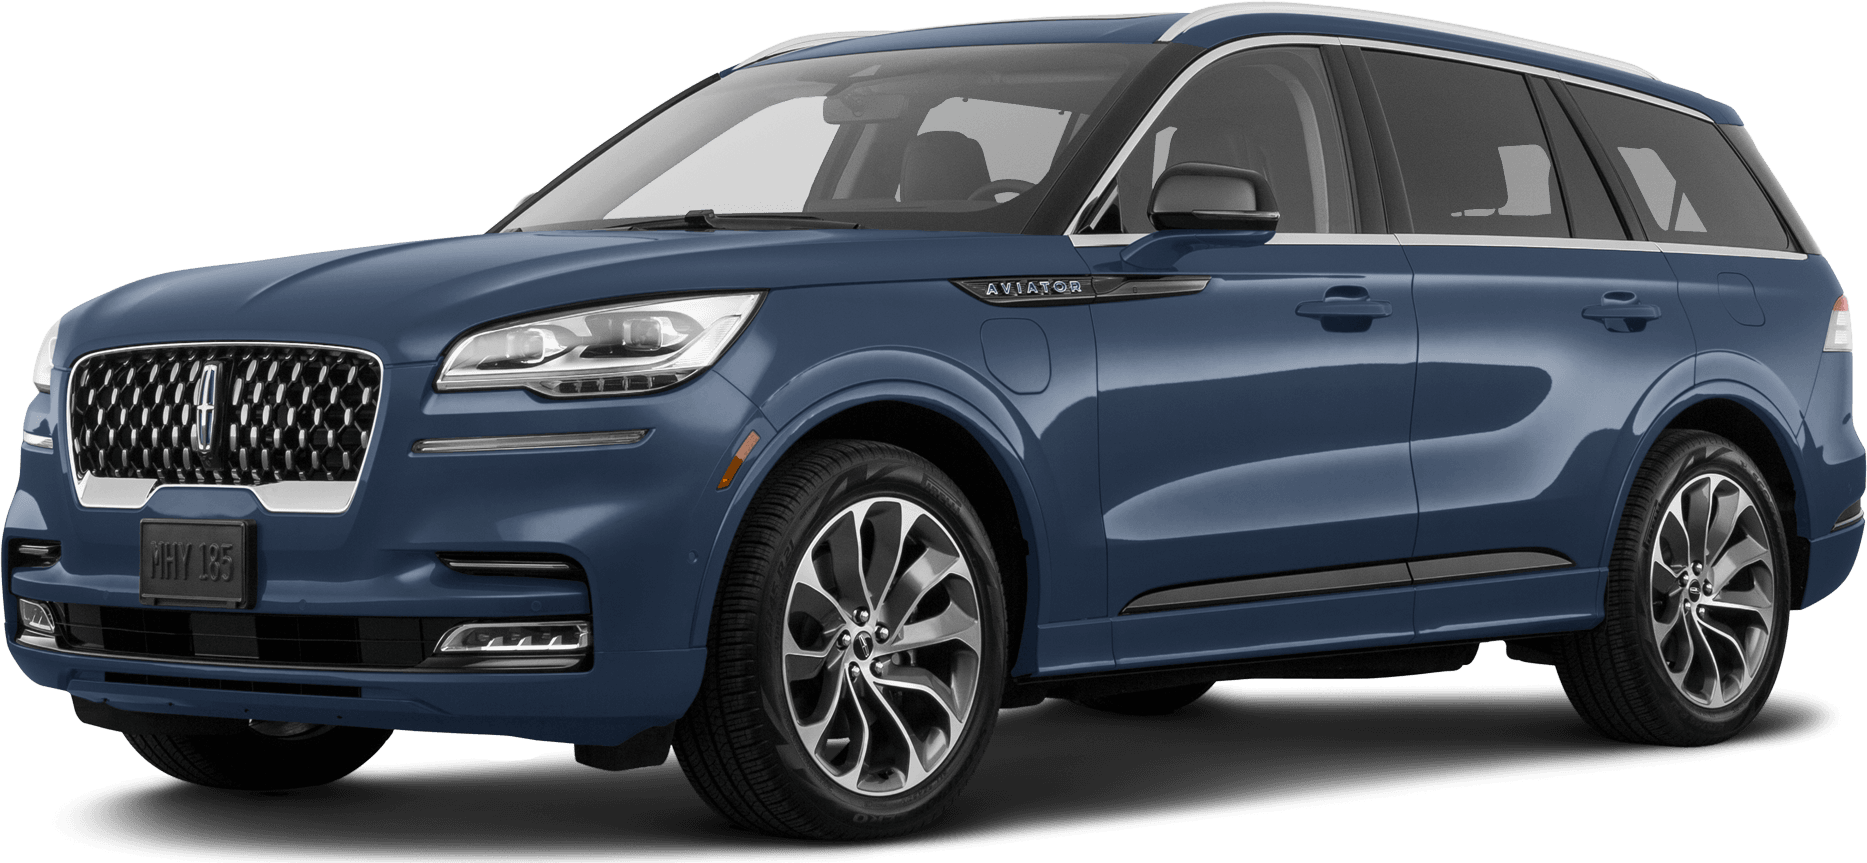 Top 5 Luxury Hybrid Cars with Best MPG for 2022